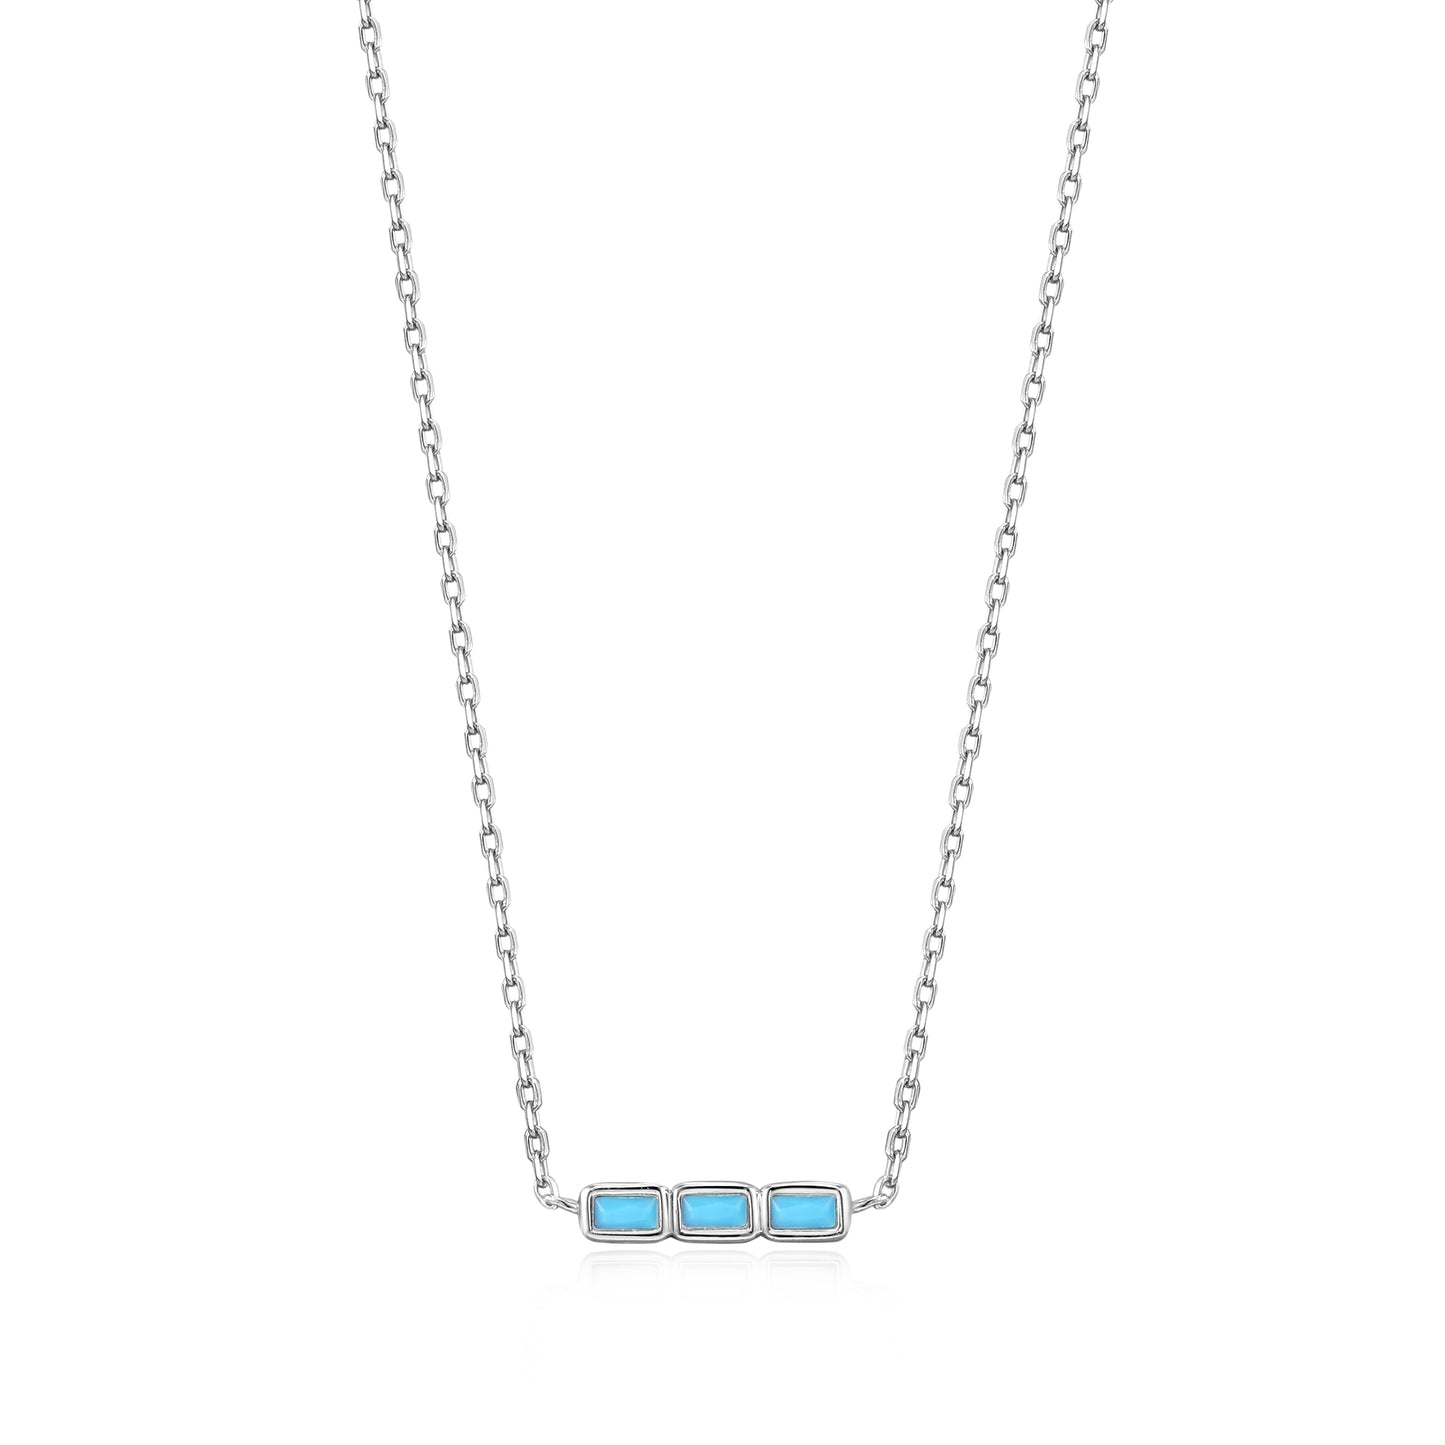 Ania Haie Turquoise Silver Bar Necklace